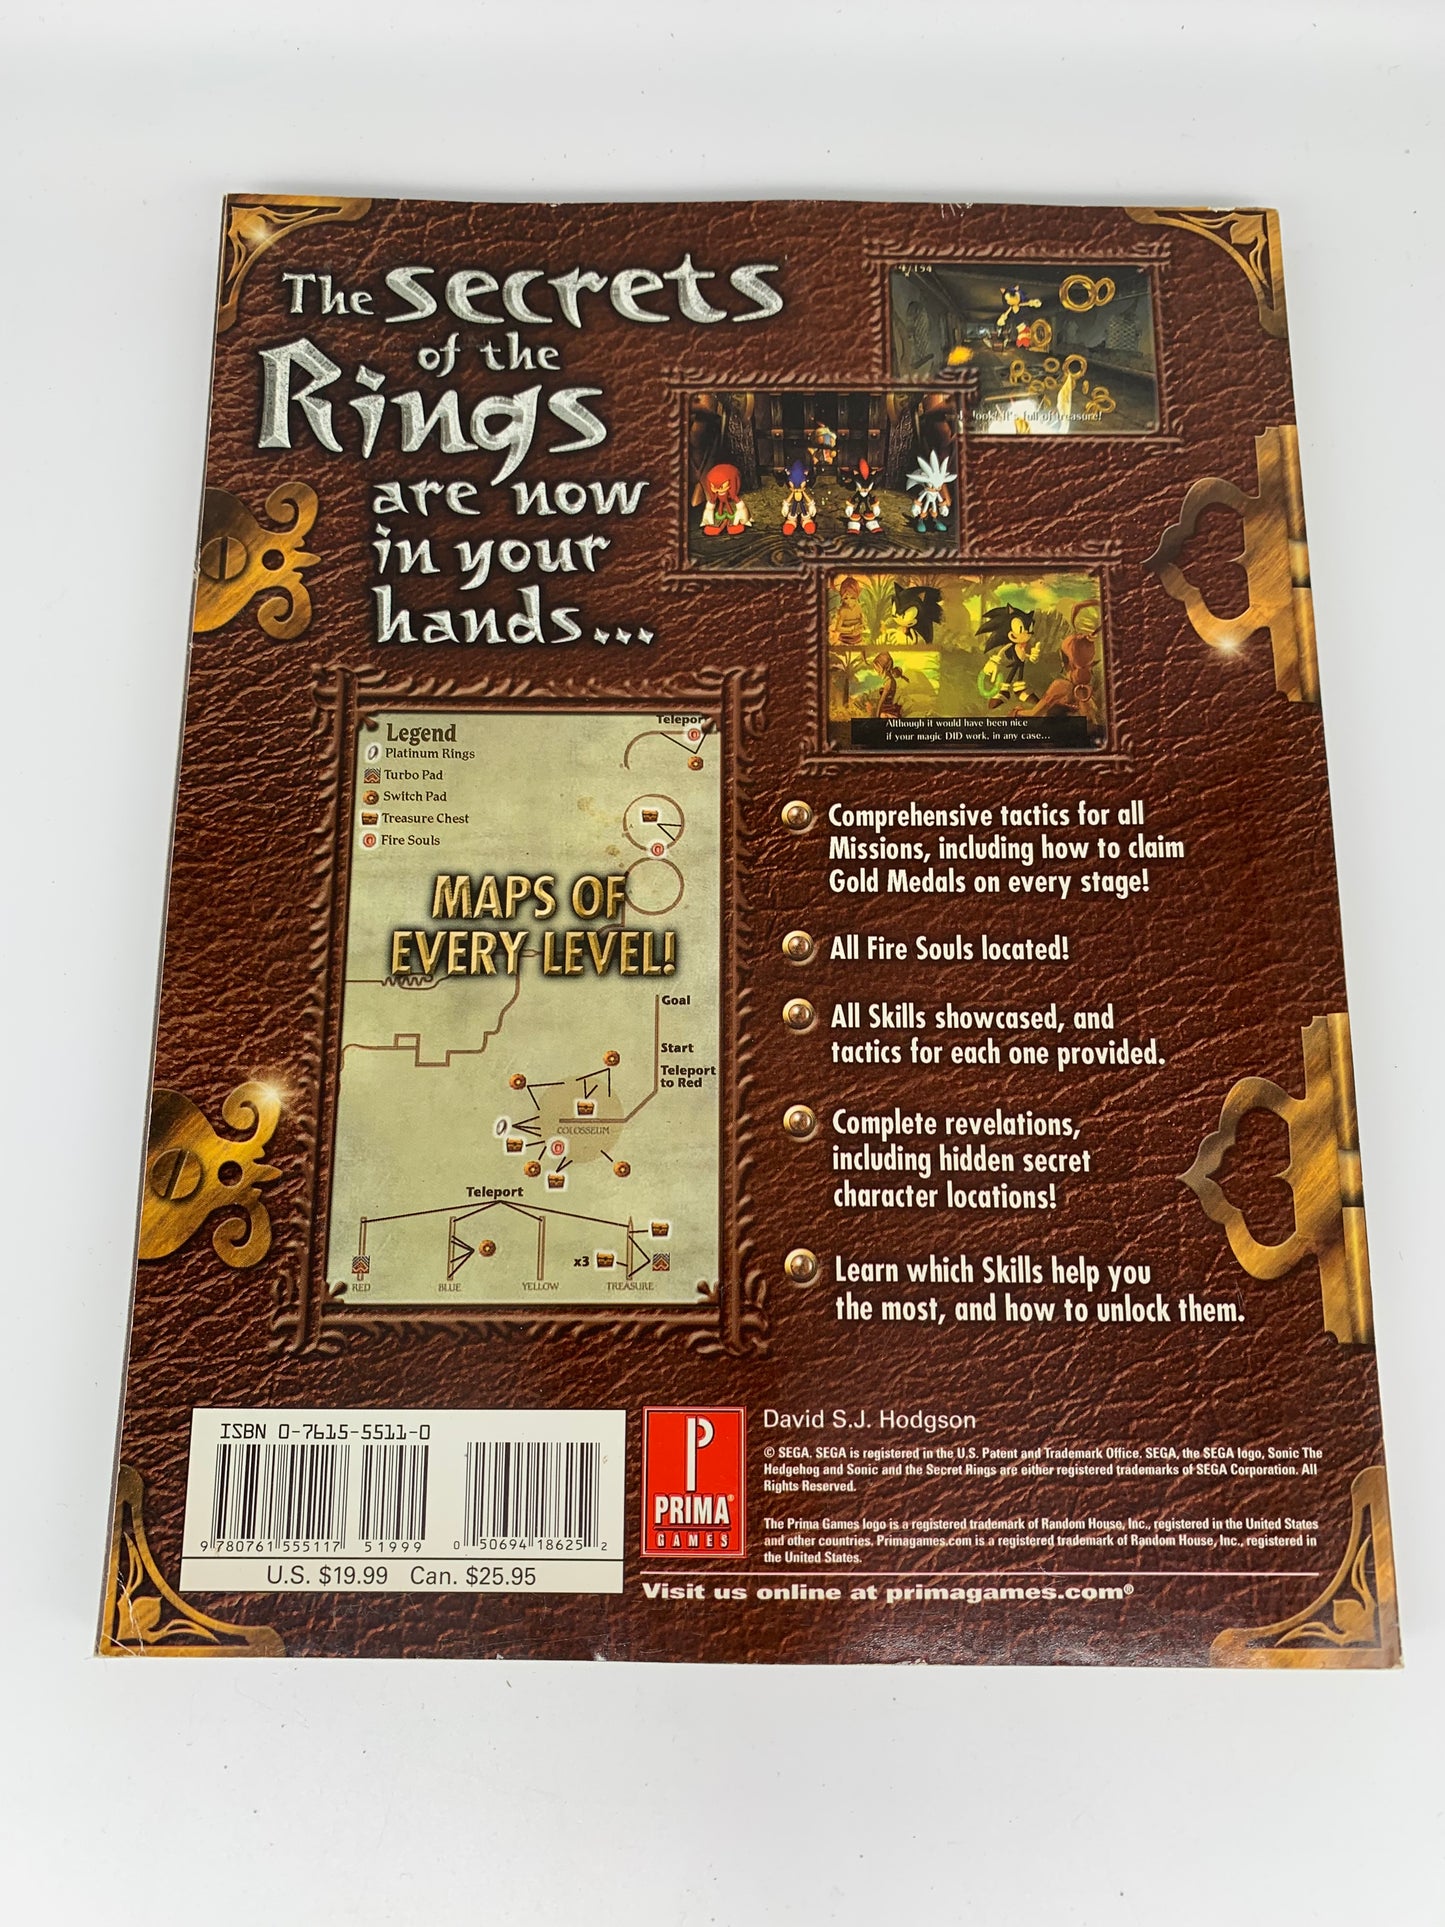 SONiC AND THE SECRET RiNGS STRATEGY GUiDE PRiMA GAMES